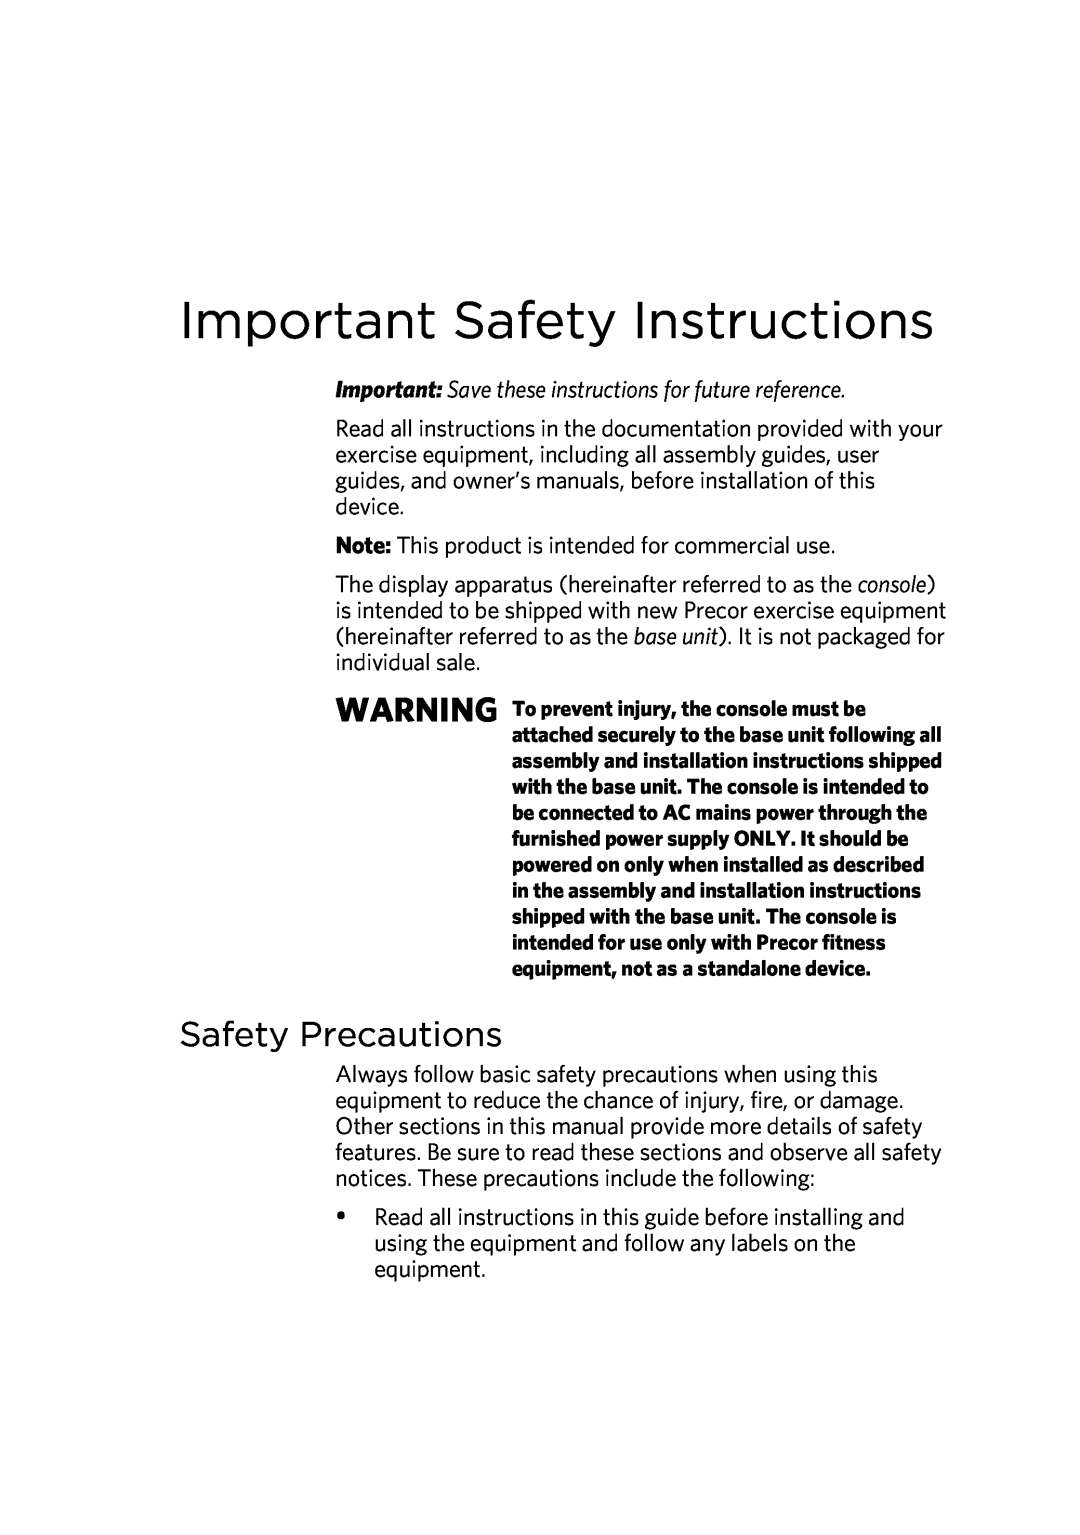 Precor P30 manual Important Safety Instructions, Safety Precautions, Important Save these instructions for future reference 